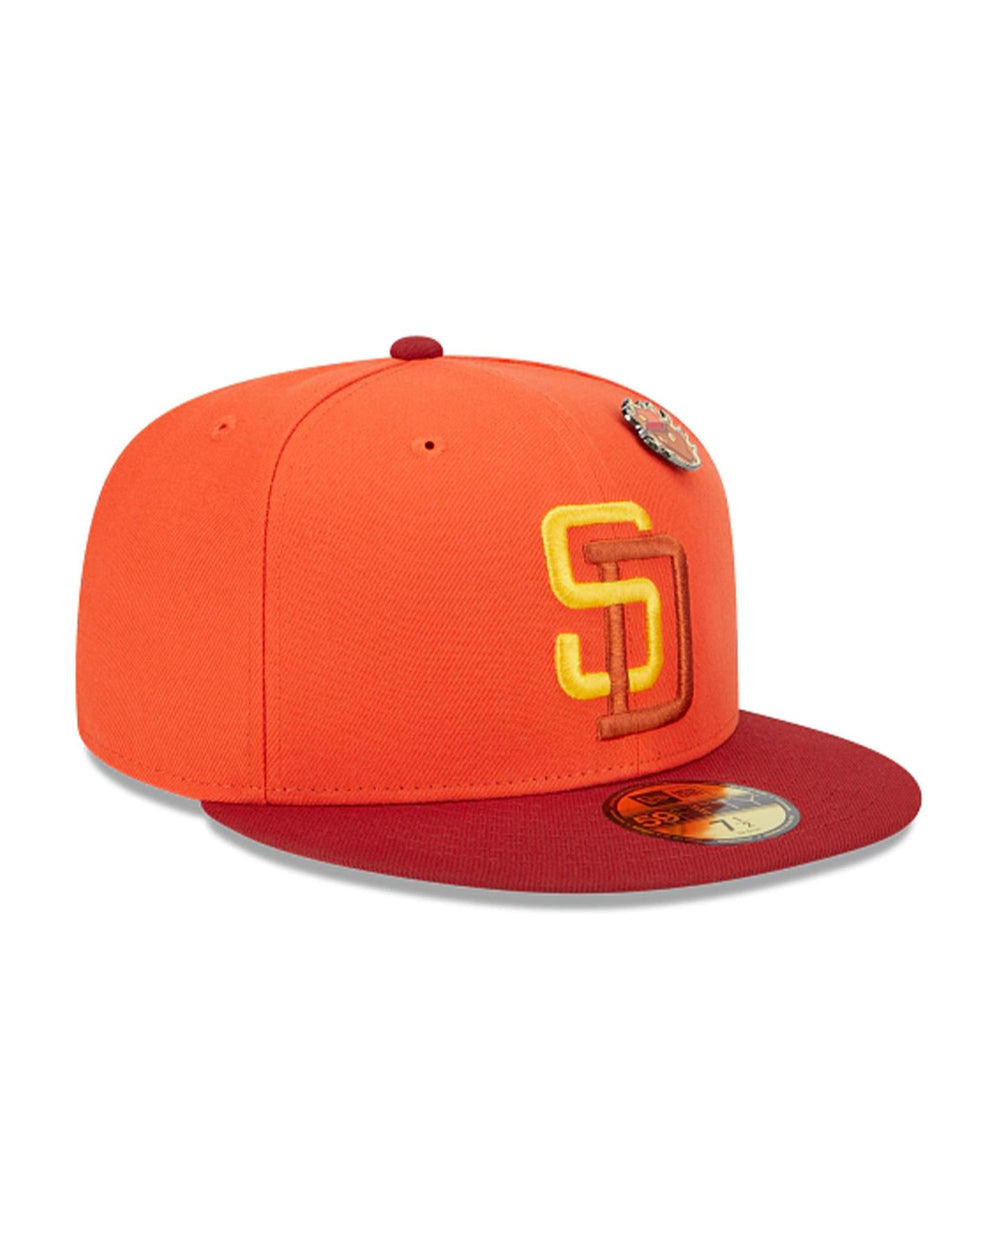 San Diego Padres Cooperstown Collection, Padres Cooperstown Jerseys, Hats